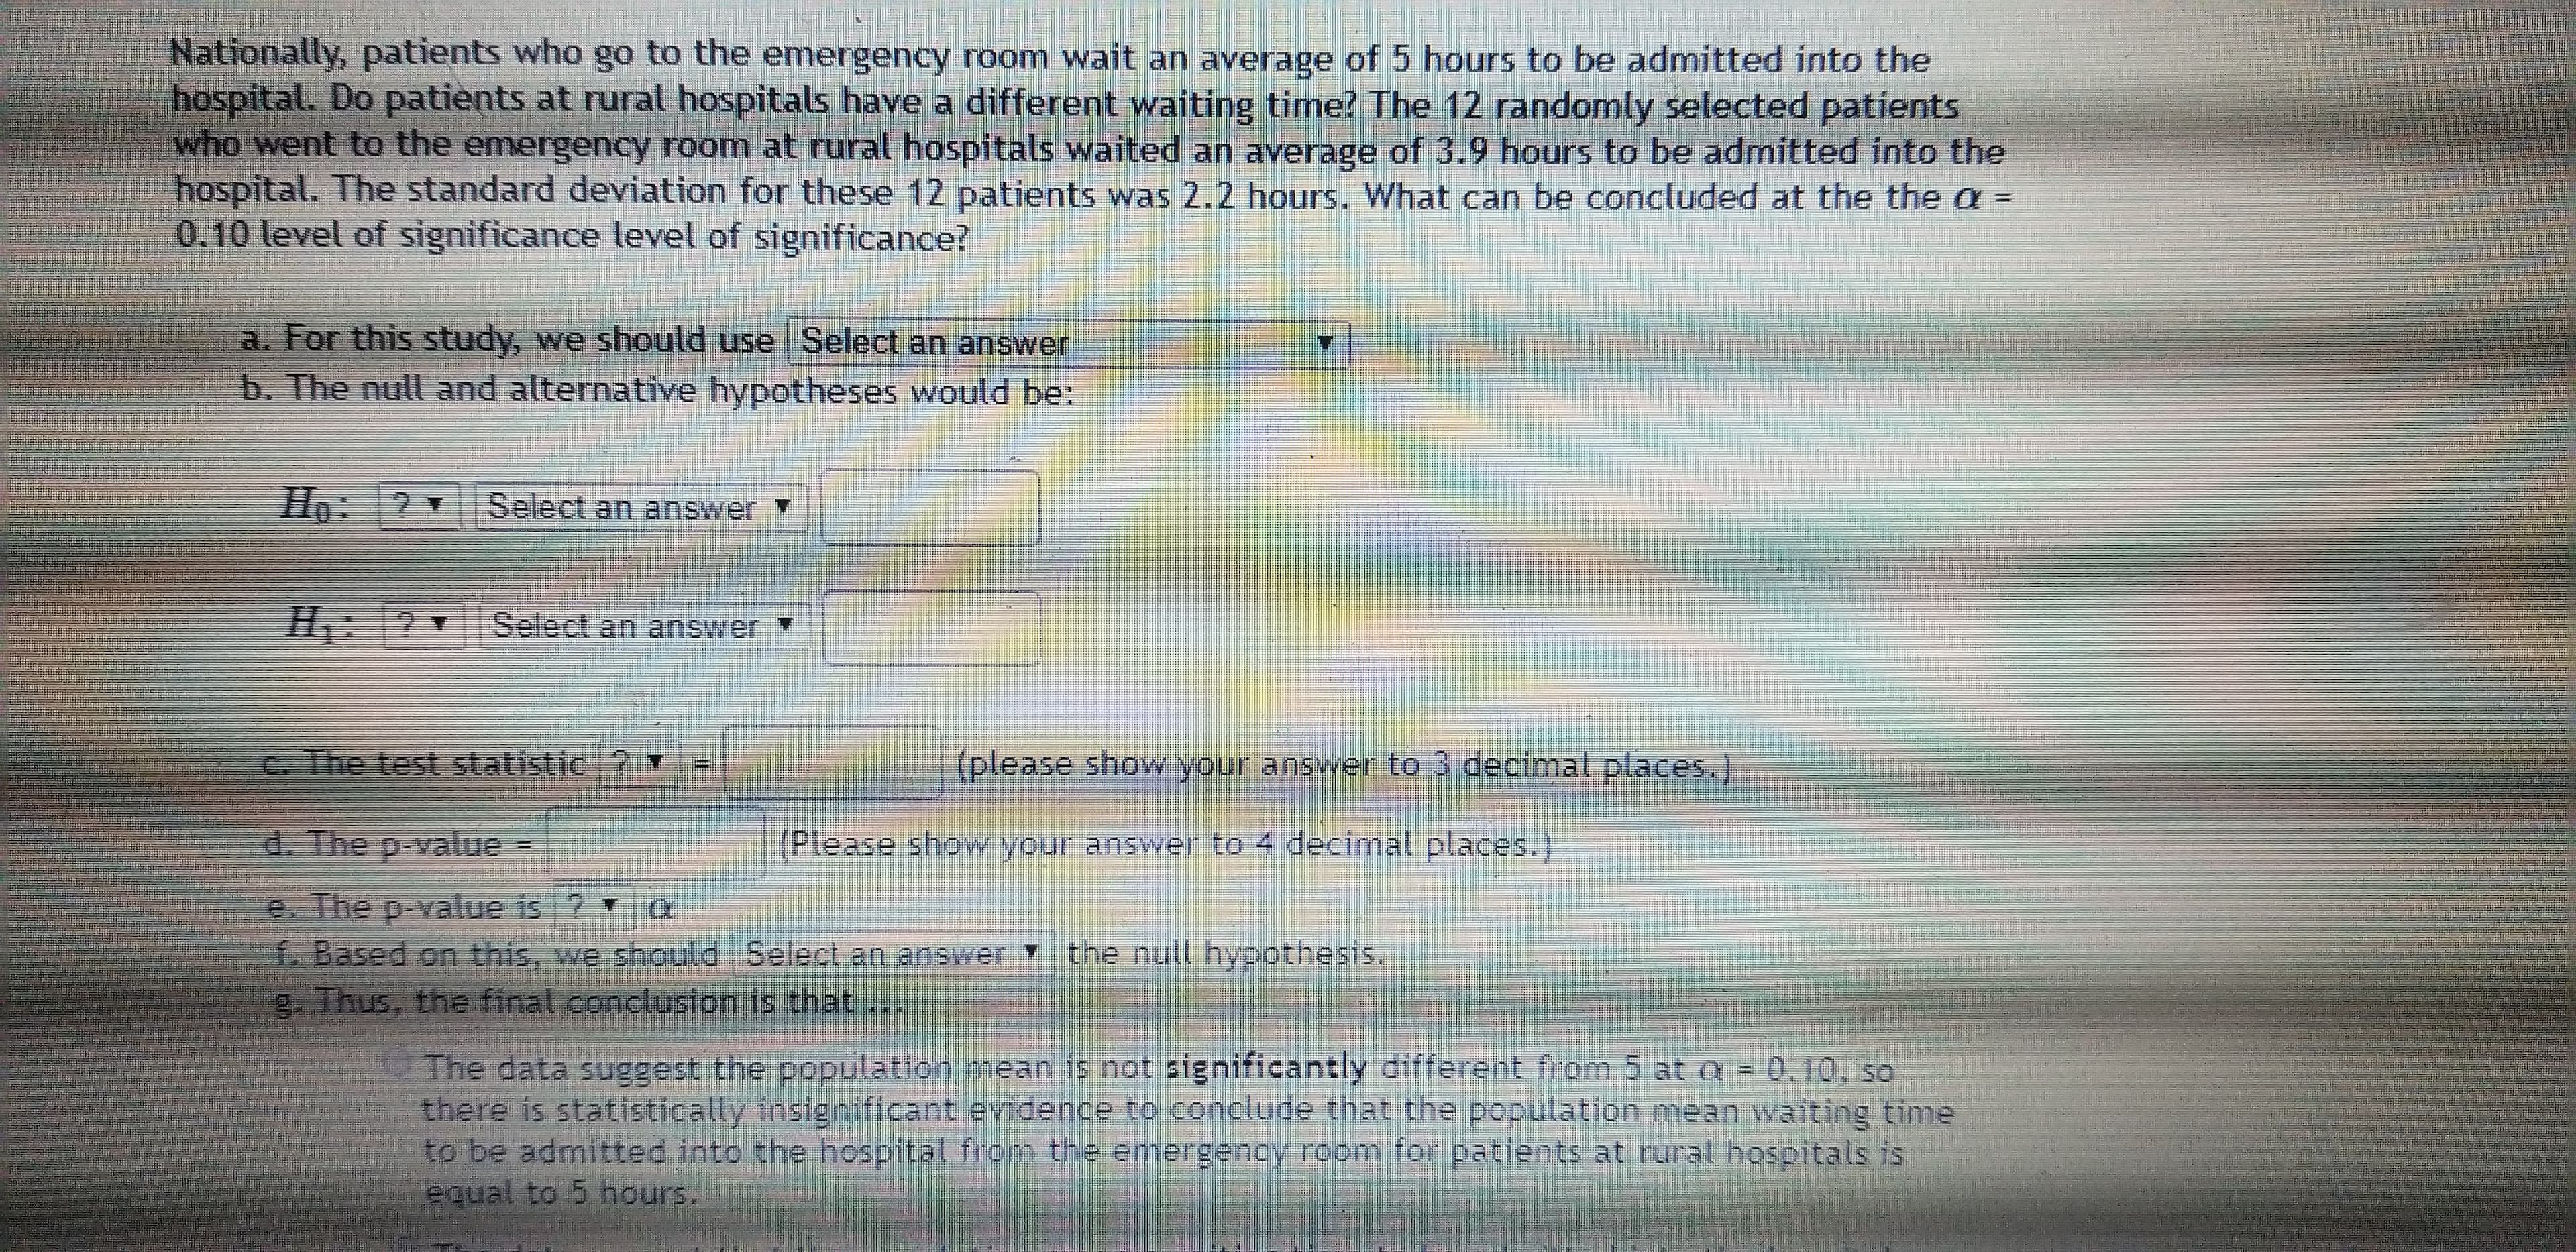 Nationally, patients who go to the emergency room wait an average of 5 hours to be admitted into the
hospital. Do patients at rural hospitals have a different waiting time? The 12 randomly selected patients
who went to the emergency room at rural hospitals waited an average of 3.9 hours to be admitted into the
hospital. The standard deviation for these 12 patients was 2.2 hours. What can be concluded at the the a =
0.10 level of significance level of significance?
a. For this study, we should use Select an answer
b. The null and alternative hypotheses would be:
Ho:2 Select an answer
H: Select an answer
C. The test statistic ? v
(please show your answer to 3 decimal places.)
d. The p-value =
(Please show your answer to 4 decimnal places.)
e. The p-value is ?
Based on this, we should Select an answer the null hypothesis.
2. Thus, the final conclusion is that
The data suggest the population mean is not significantly different from 5 at a = 0.10, so
there is statistically insignificant evidence to conclude that the population mean waiting time
to be admitted into the hospital from the emergency room for patients at rural hospitals is
equal to 5 hours.
